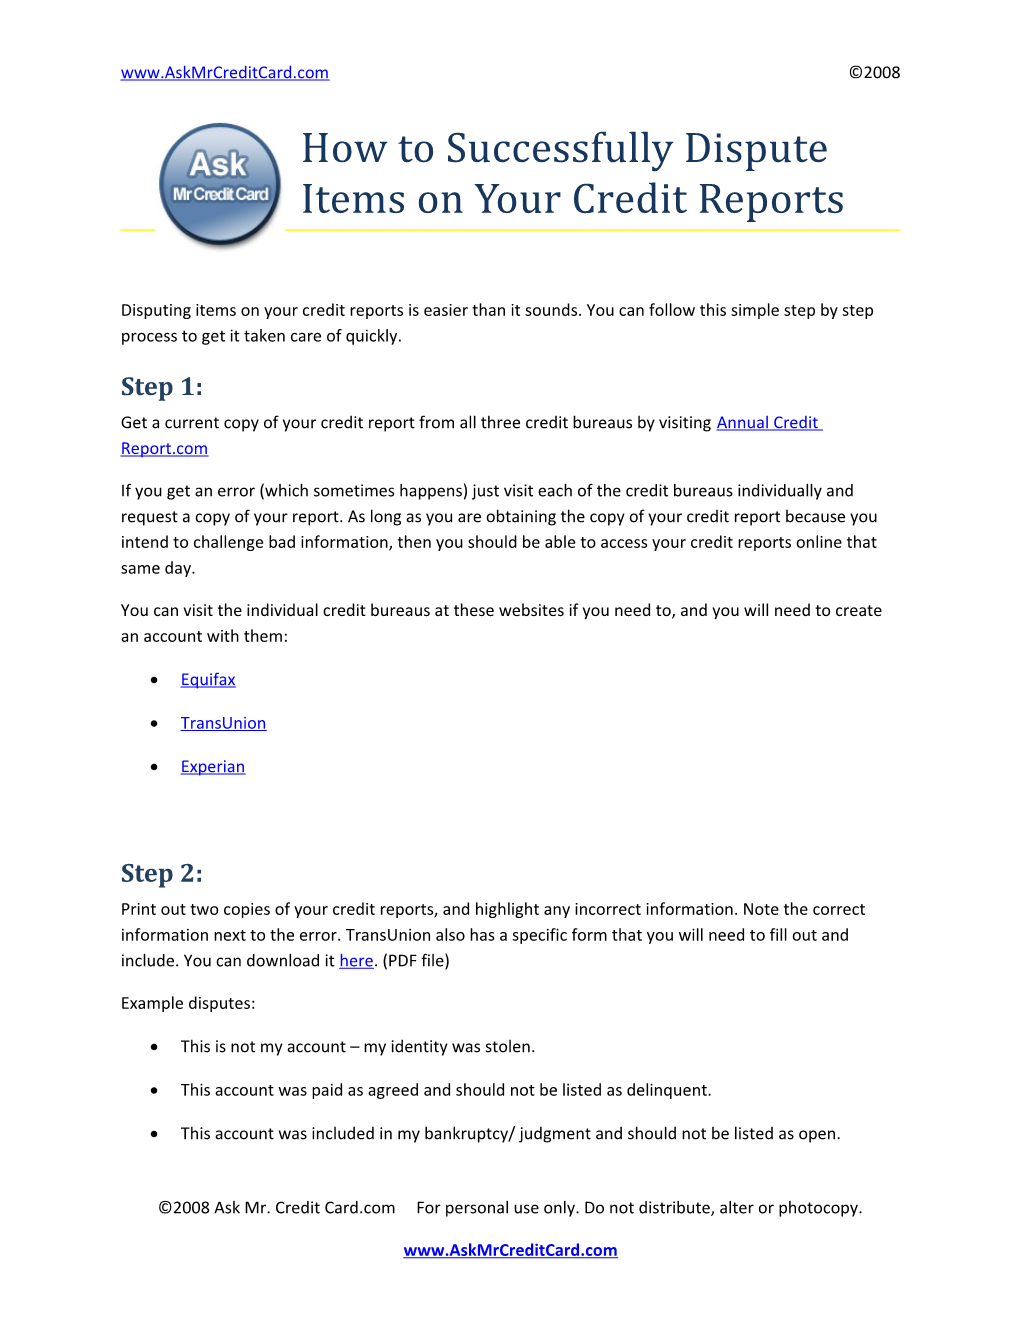 How to Successfully Dispute Items on Your Credit Reports